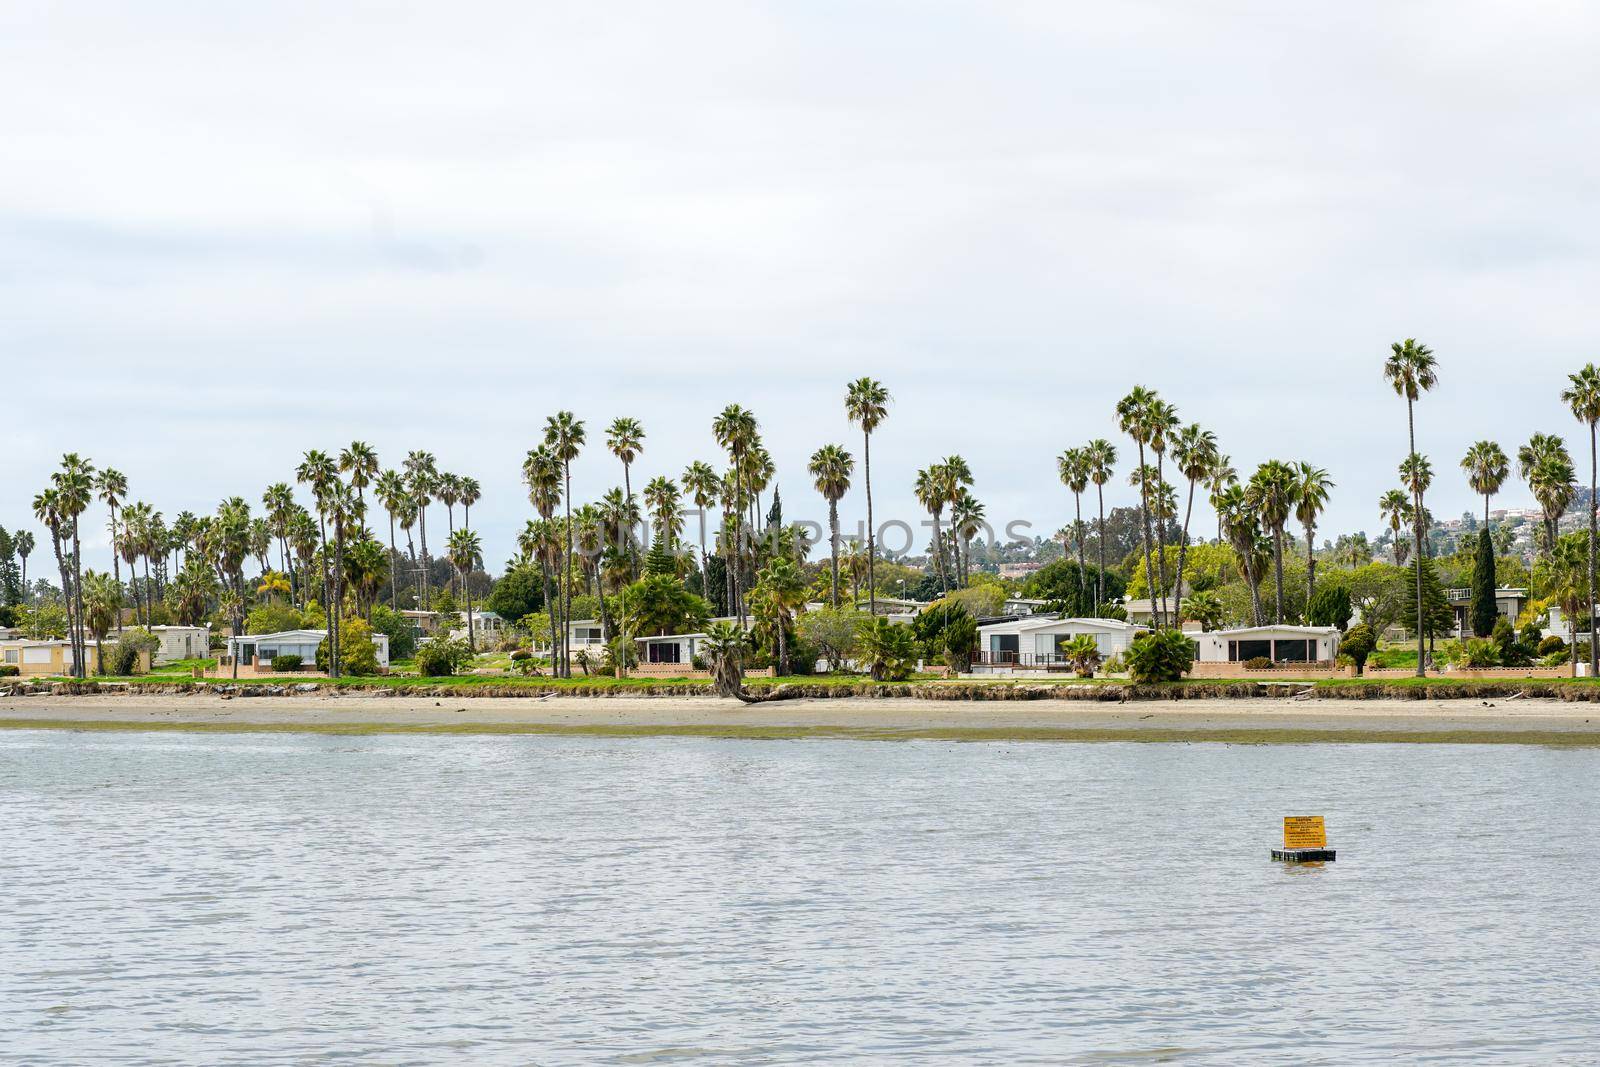 Caravan and home trailer park area next the water in the De Anza Cove in Mission Bay in San Diego by Bonandbon